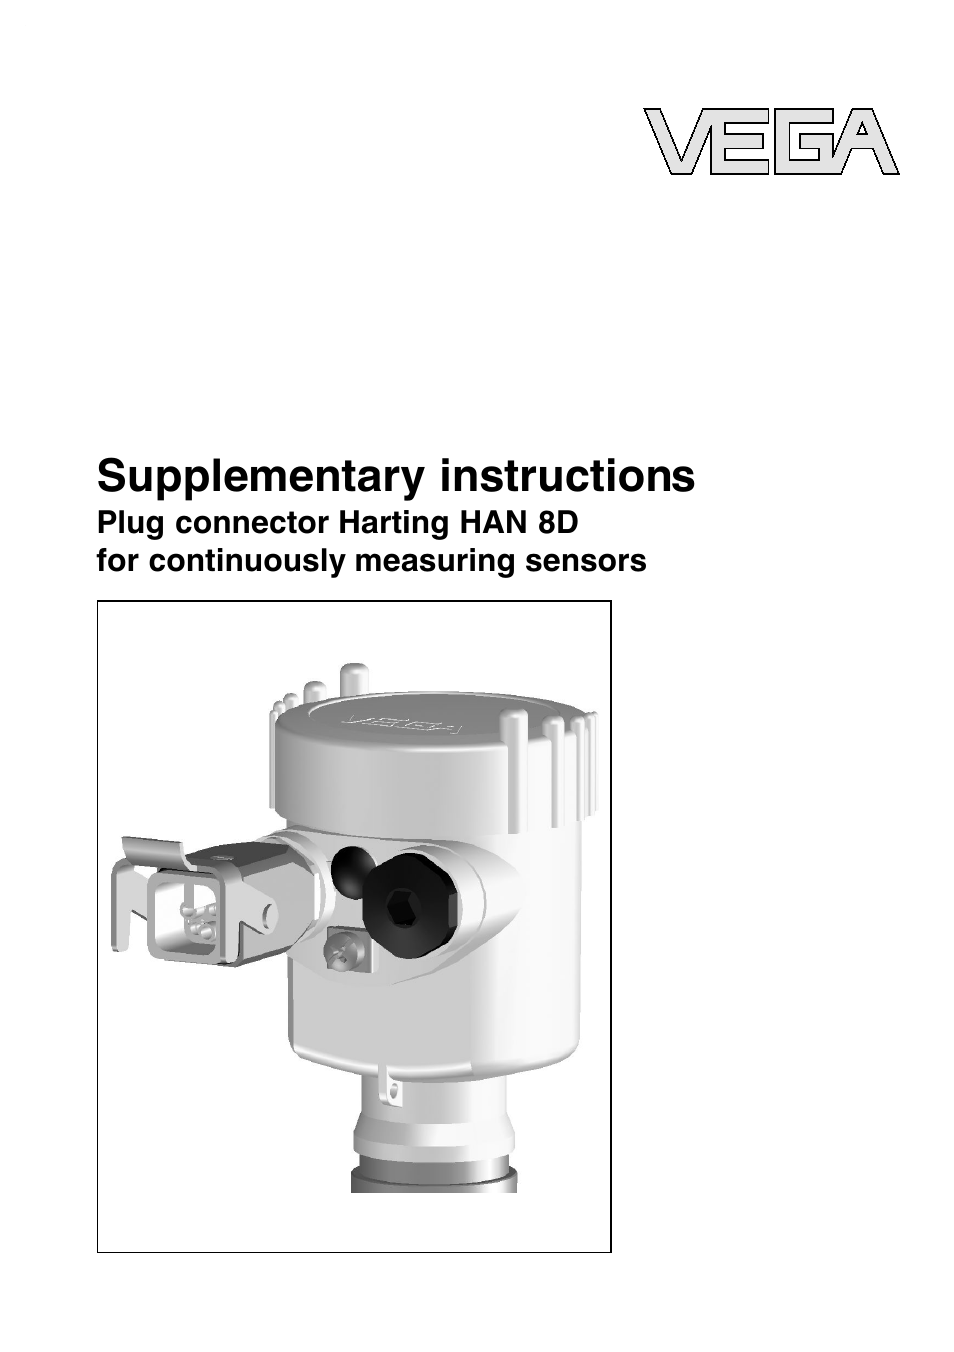 Plug connector Harting HAN 8D for continuously measuring sensors